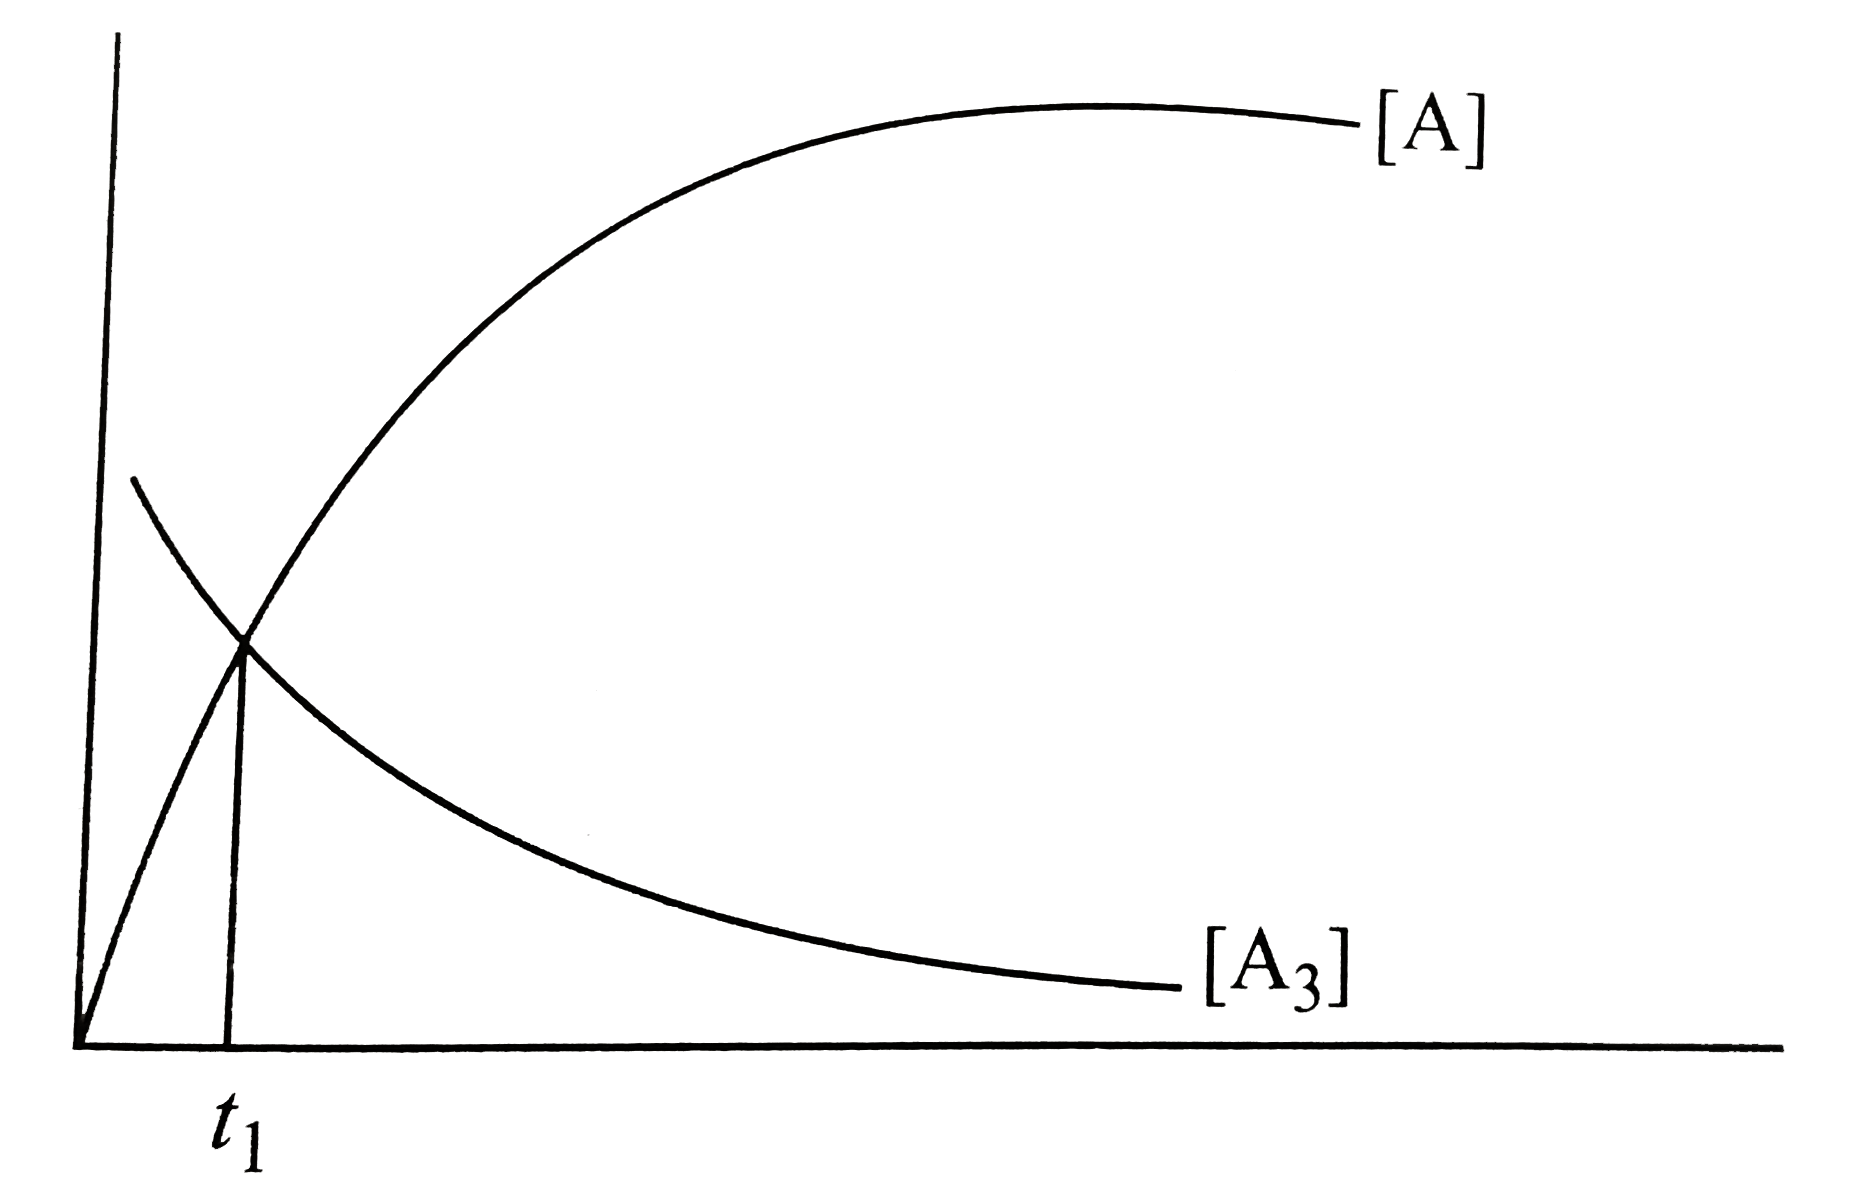 Using the given graph showing concentration of reactants and Products as a function of times for the reaction:   A(3) rarr 3A   The time t(1) corresponds to